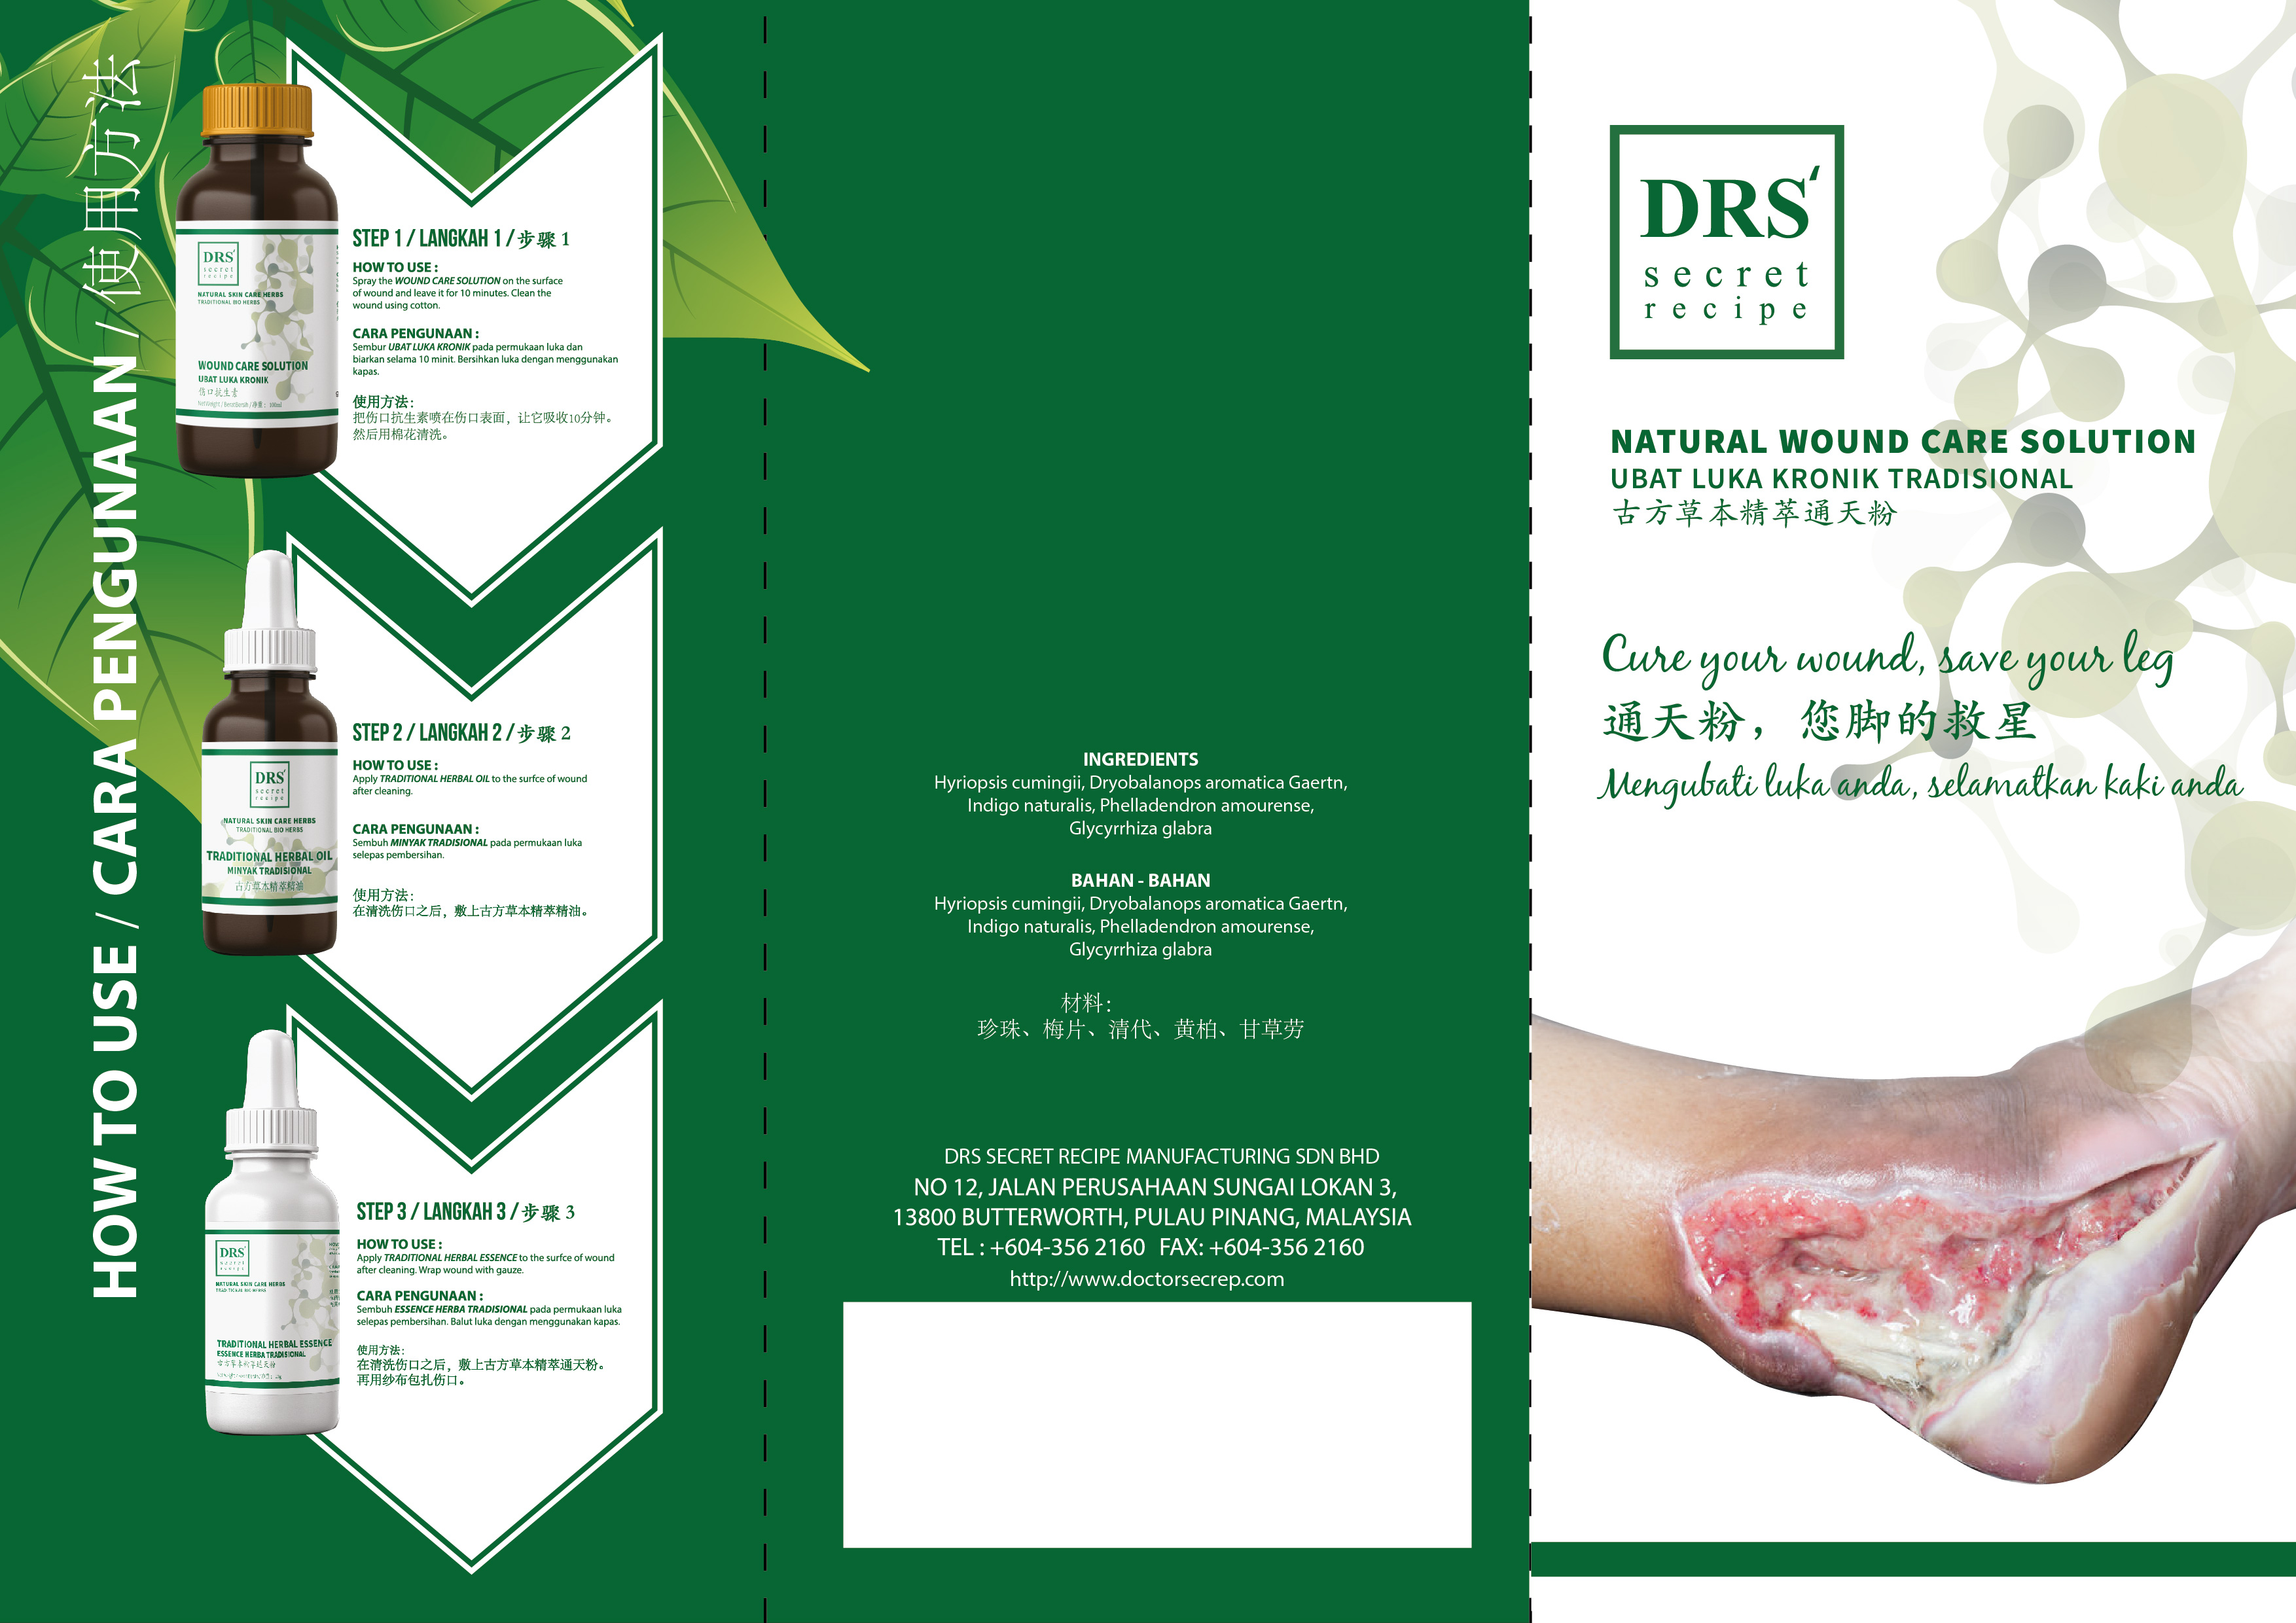 （Diabetic wound savior）Natural Wound Care Solution